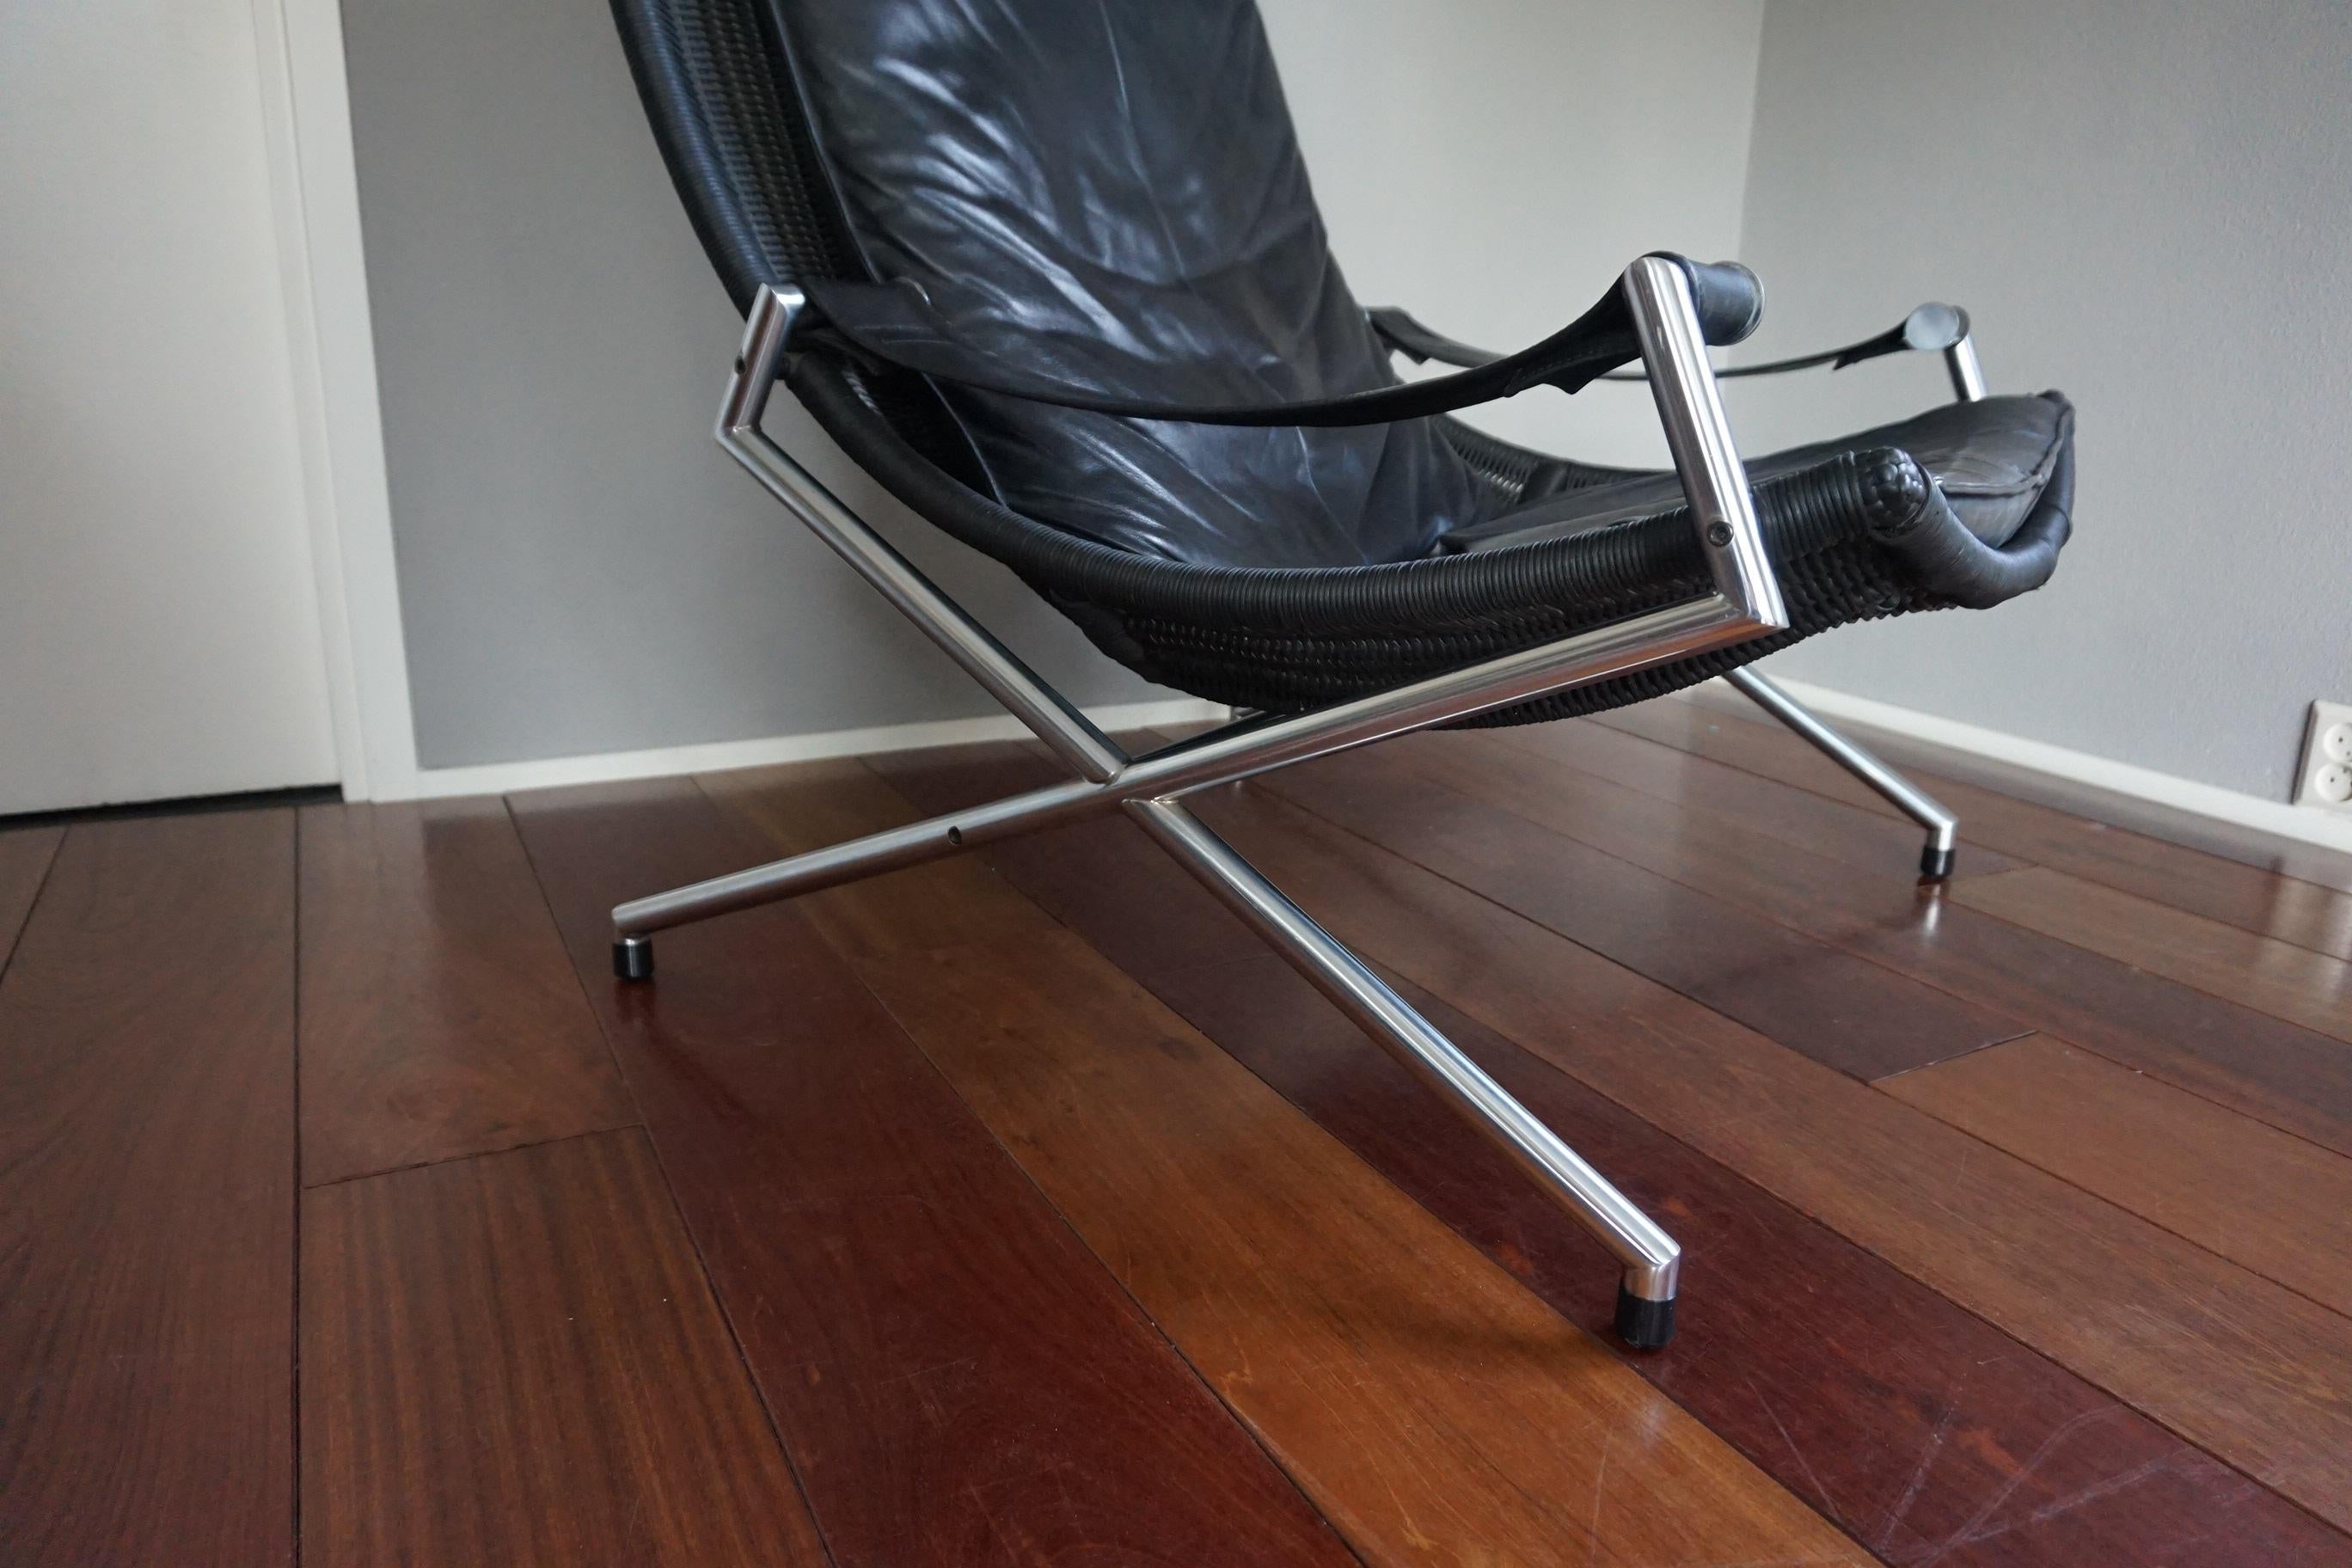 Large and modern lounge chair in chromed metal and black leather by Gerard Van Den Berg for Rohé, Netherlands.

If you are looking for a comfortable, stylish and great looking chair and you don't mind it not being perfect then this quality chair